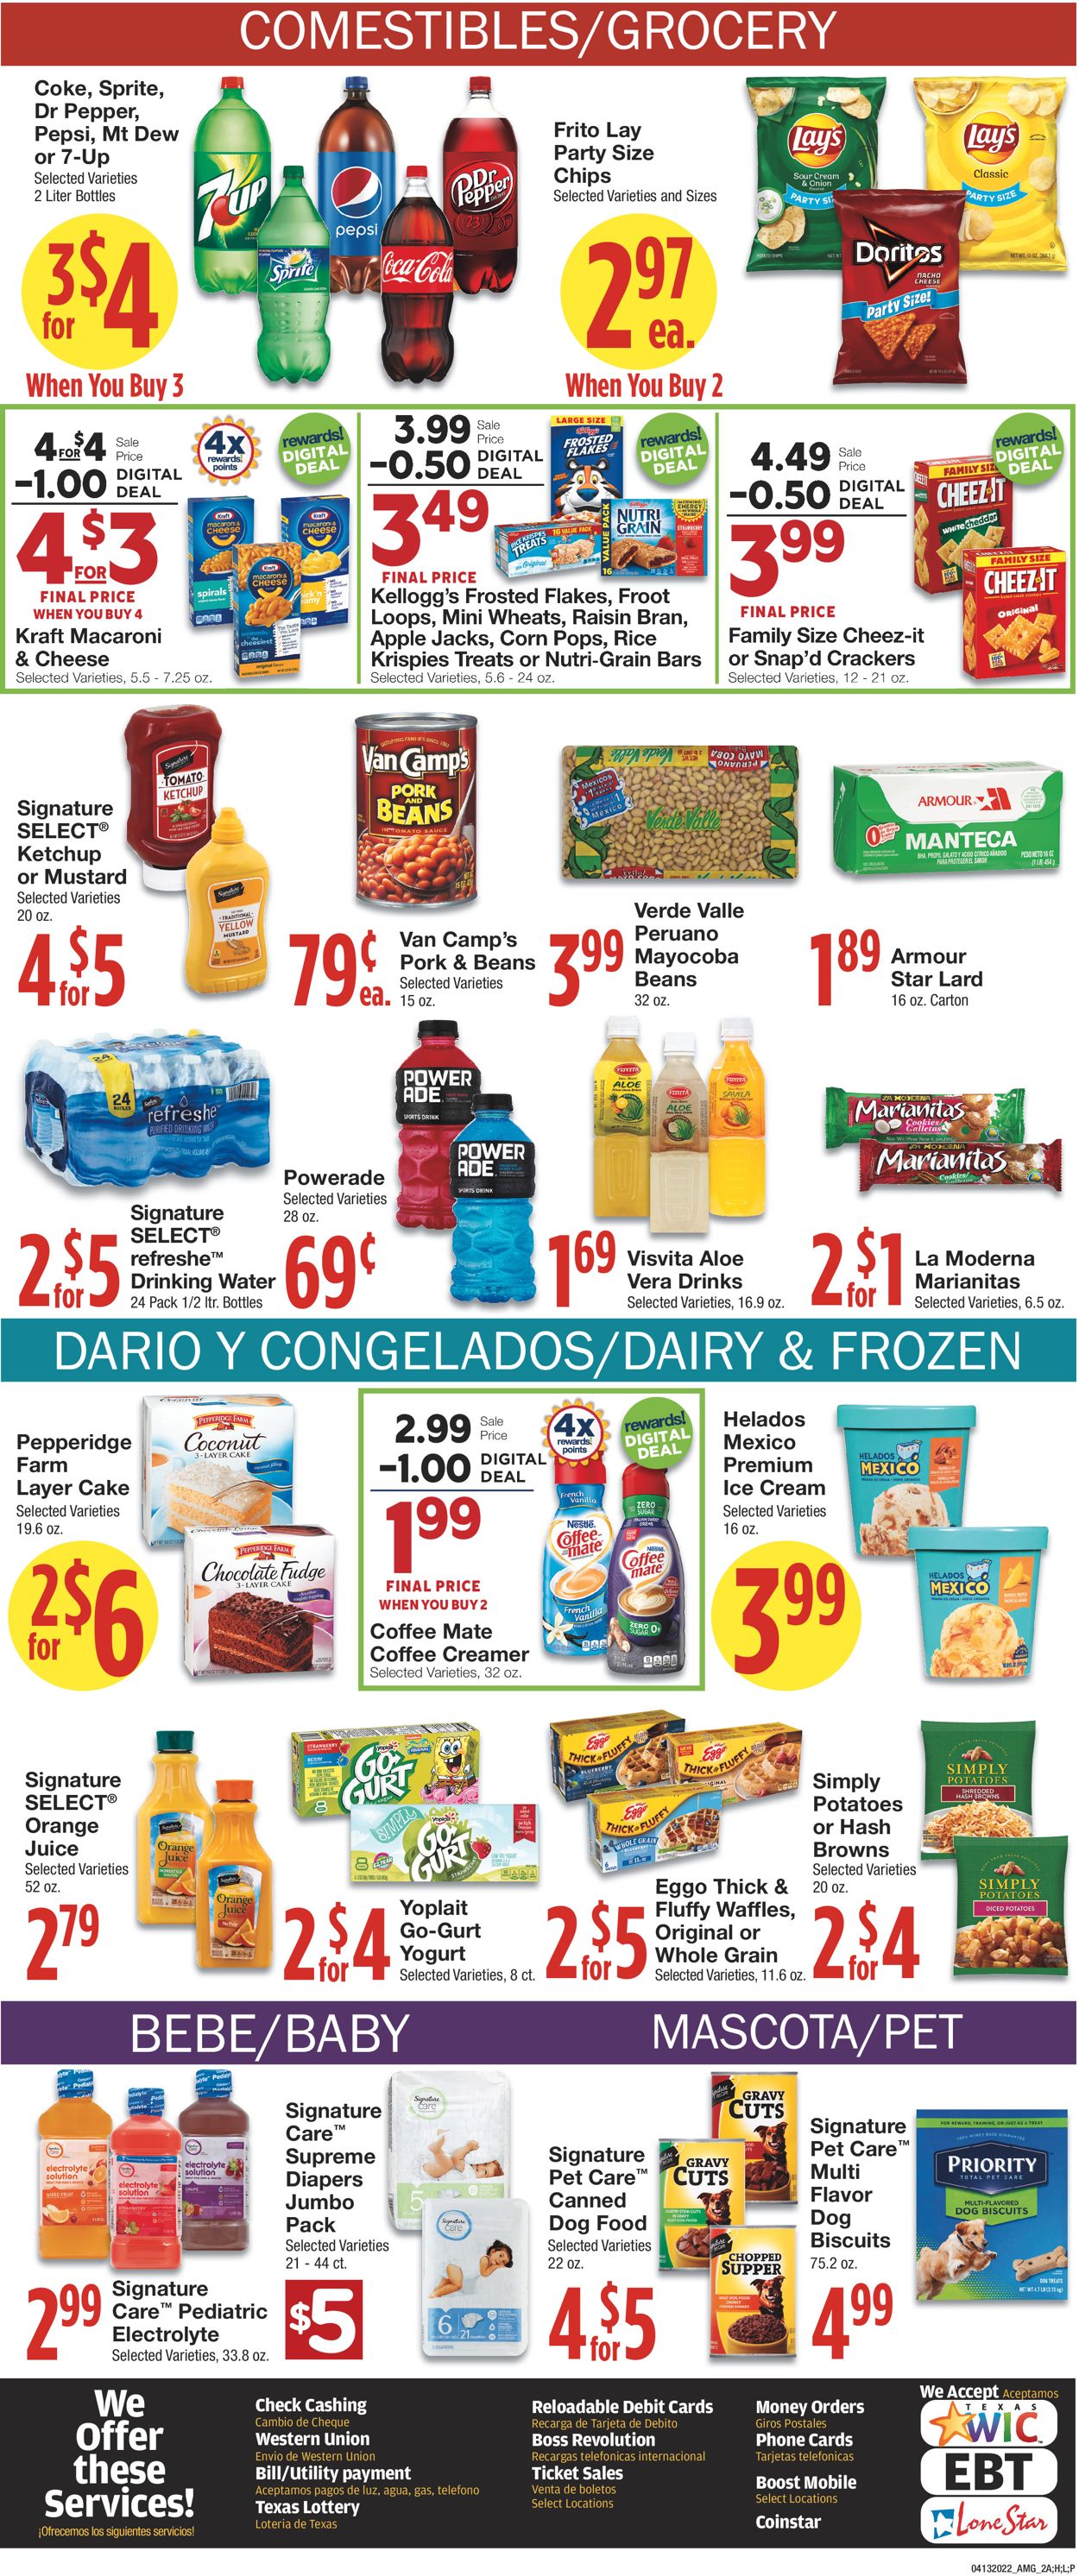 United Supermarkets EASTER AD 2022 Weekly Ad Circular - valid 04/13-04/19/2022 (Page 2)